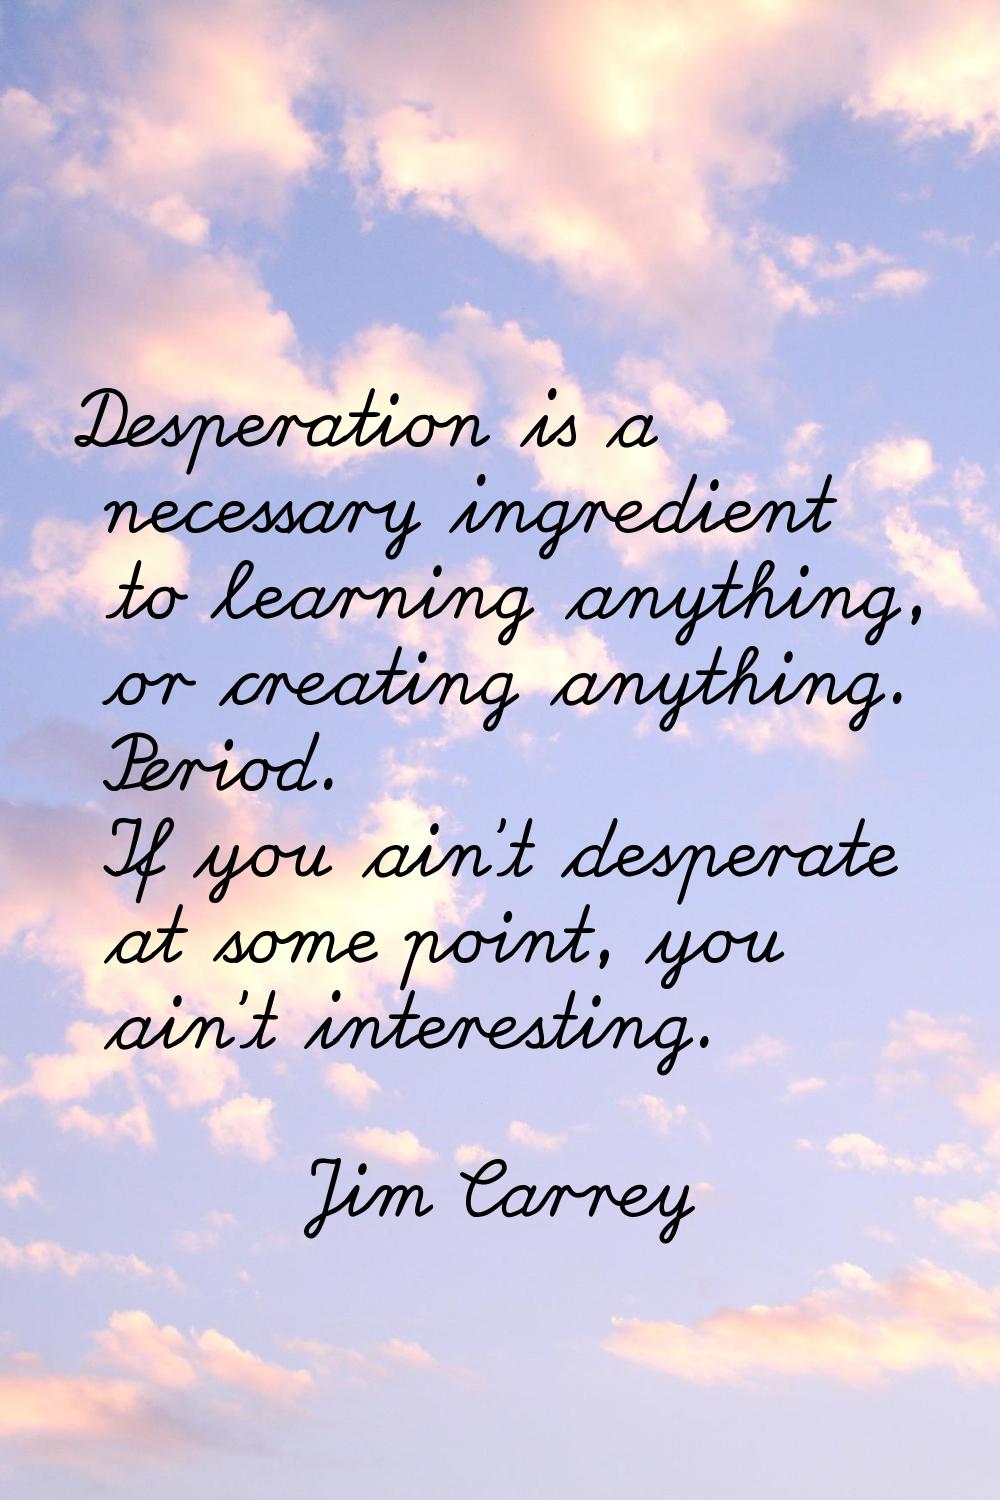 Desperation is a necessary ingredient to learning anything, or creating anything. Period. If you ai